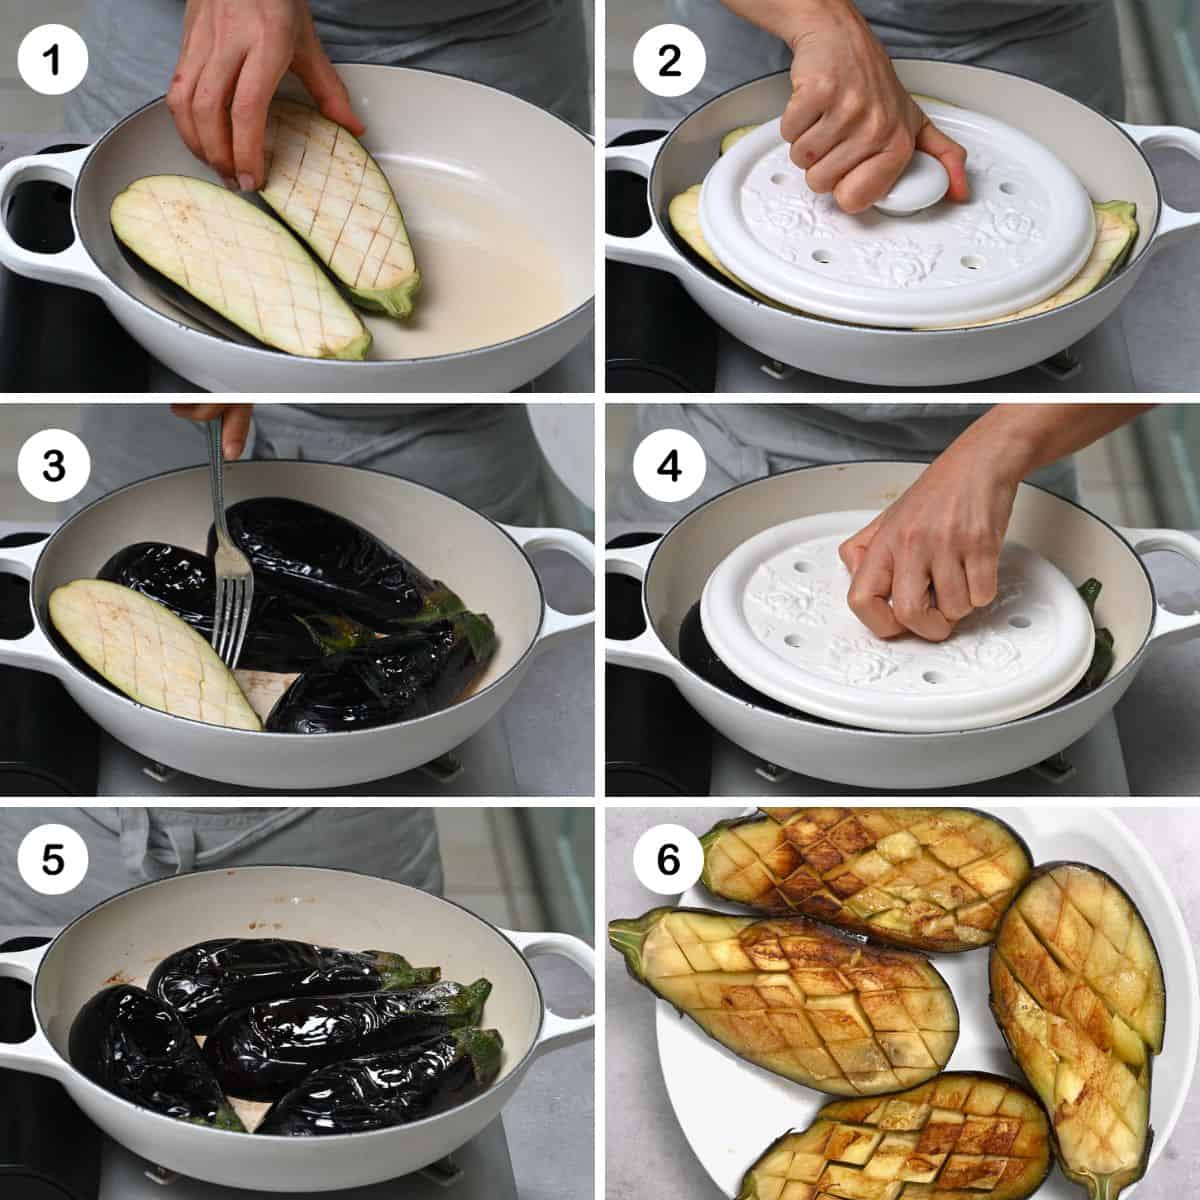 Steps for cooking eggplant in a pan